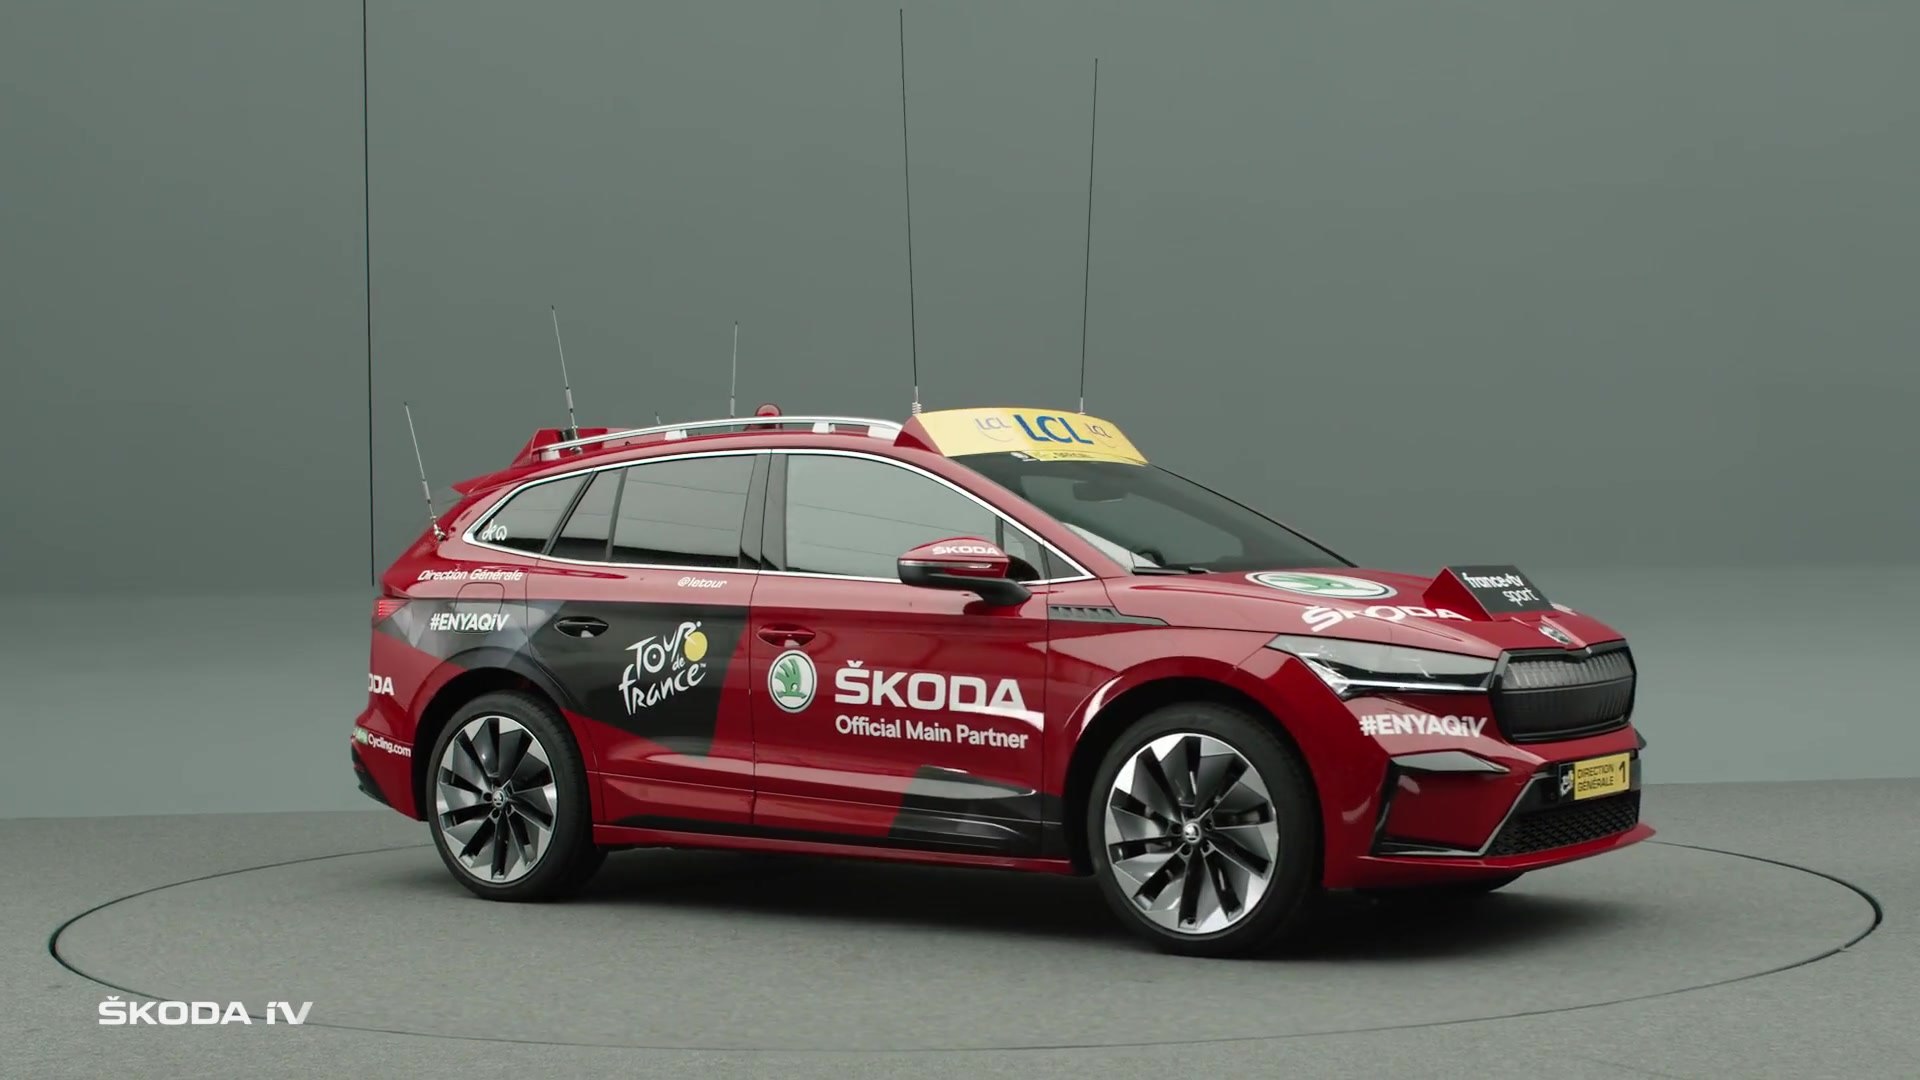 Škoda ENYAQ iV makes its debut as the lead vehicle in the Tour de France -  video Dailymotion